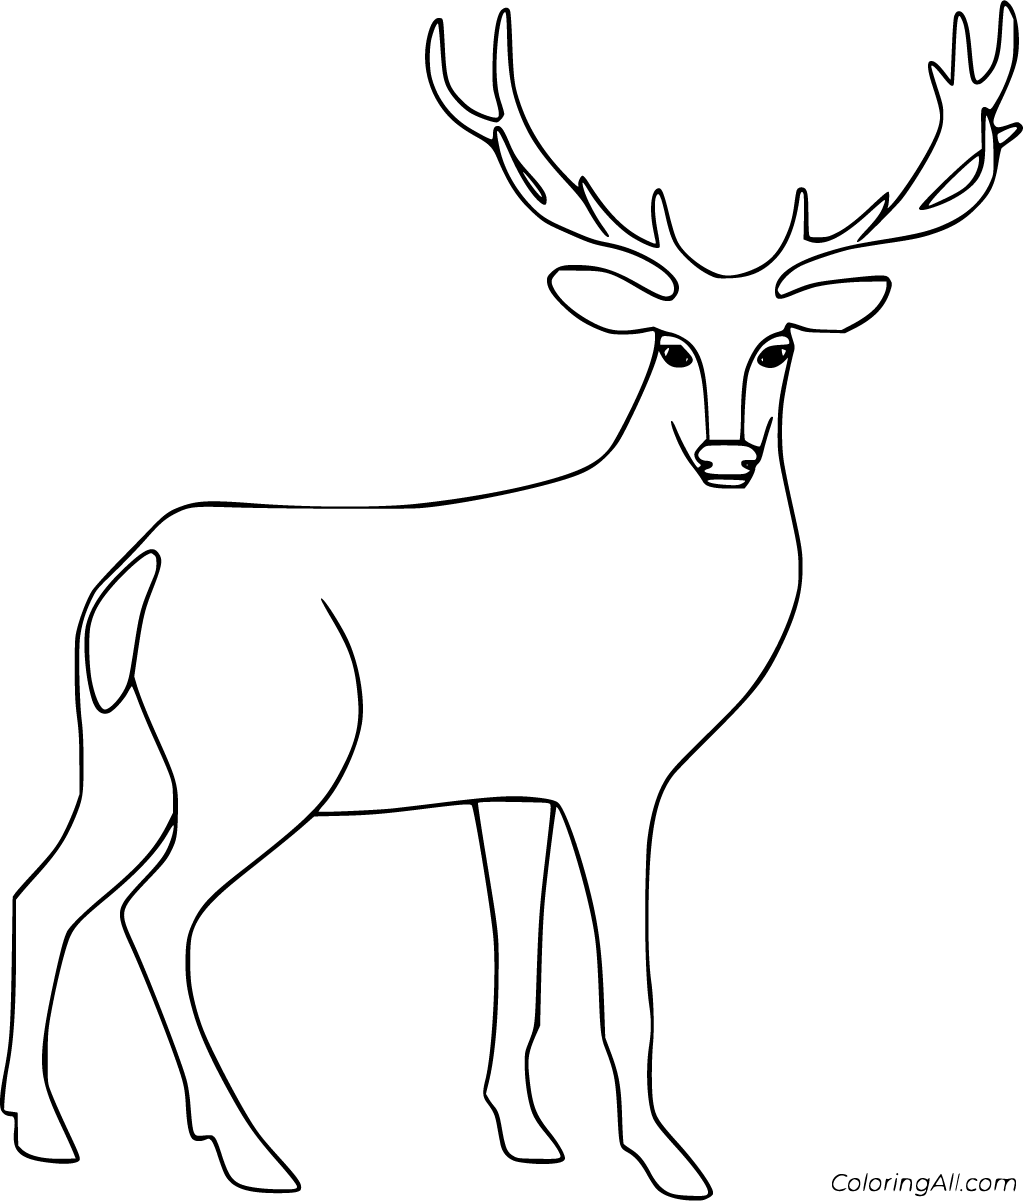 Red Deer Coloring Pages - ColoringAll